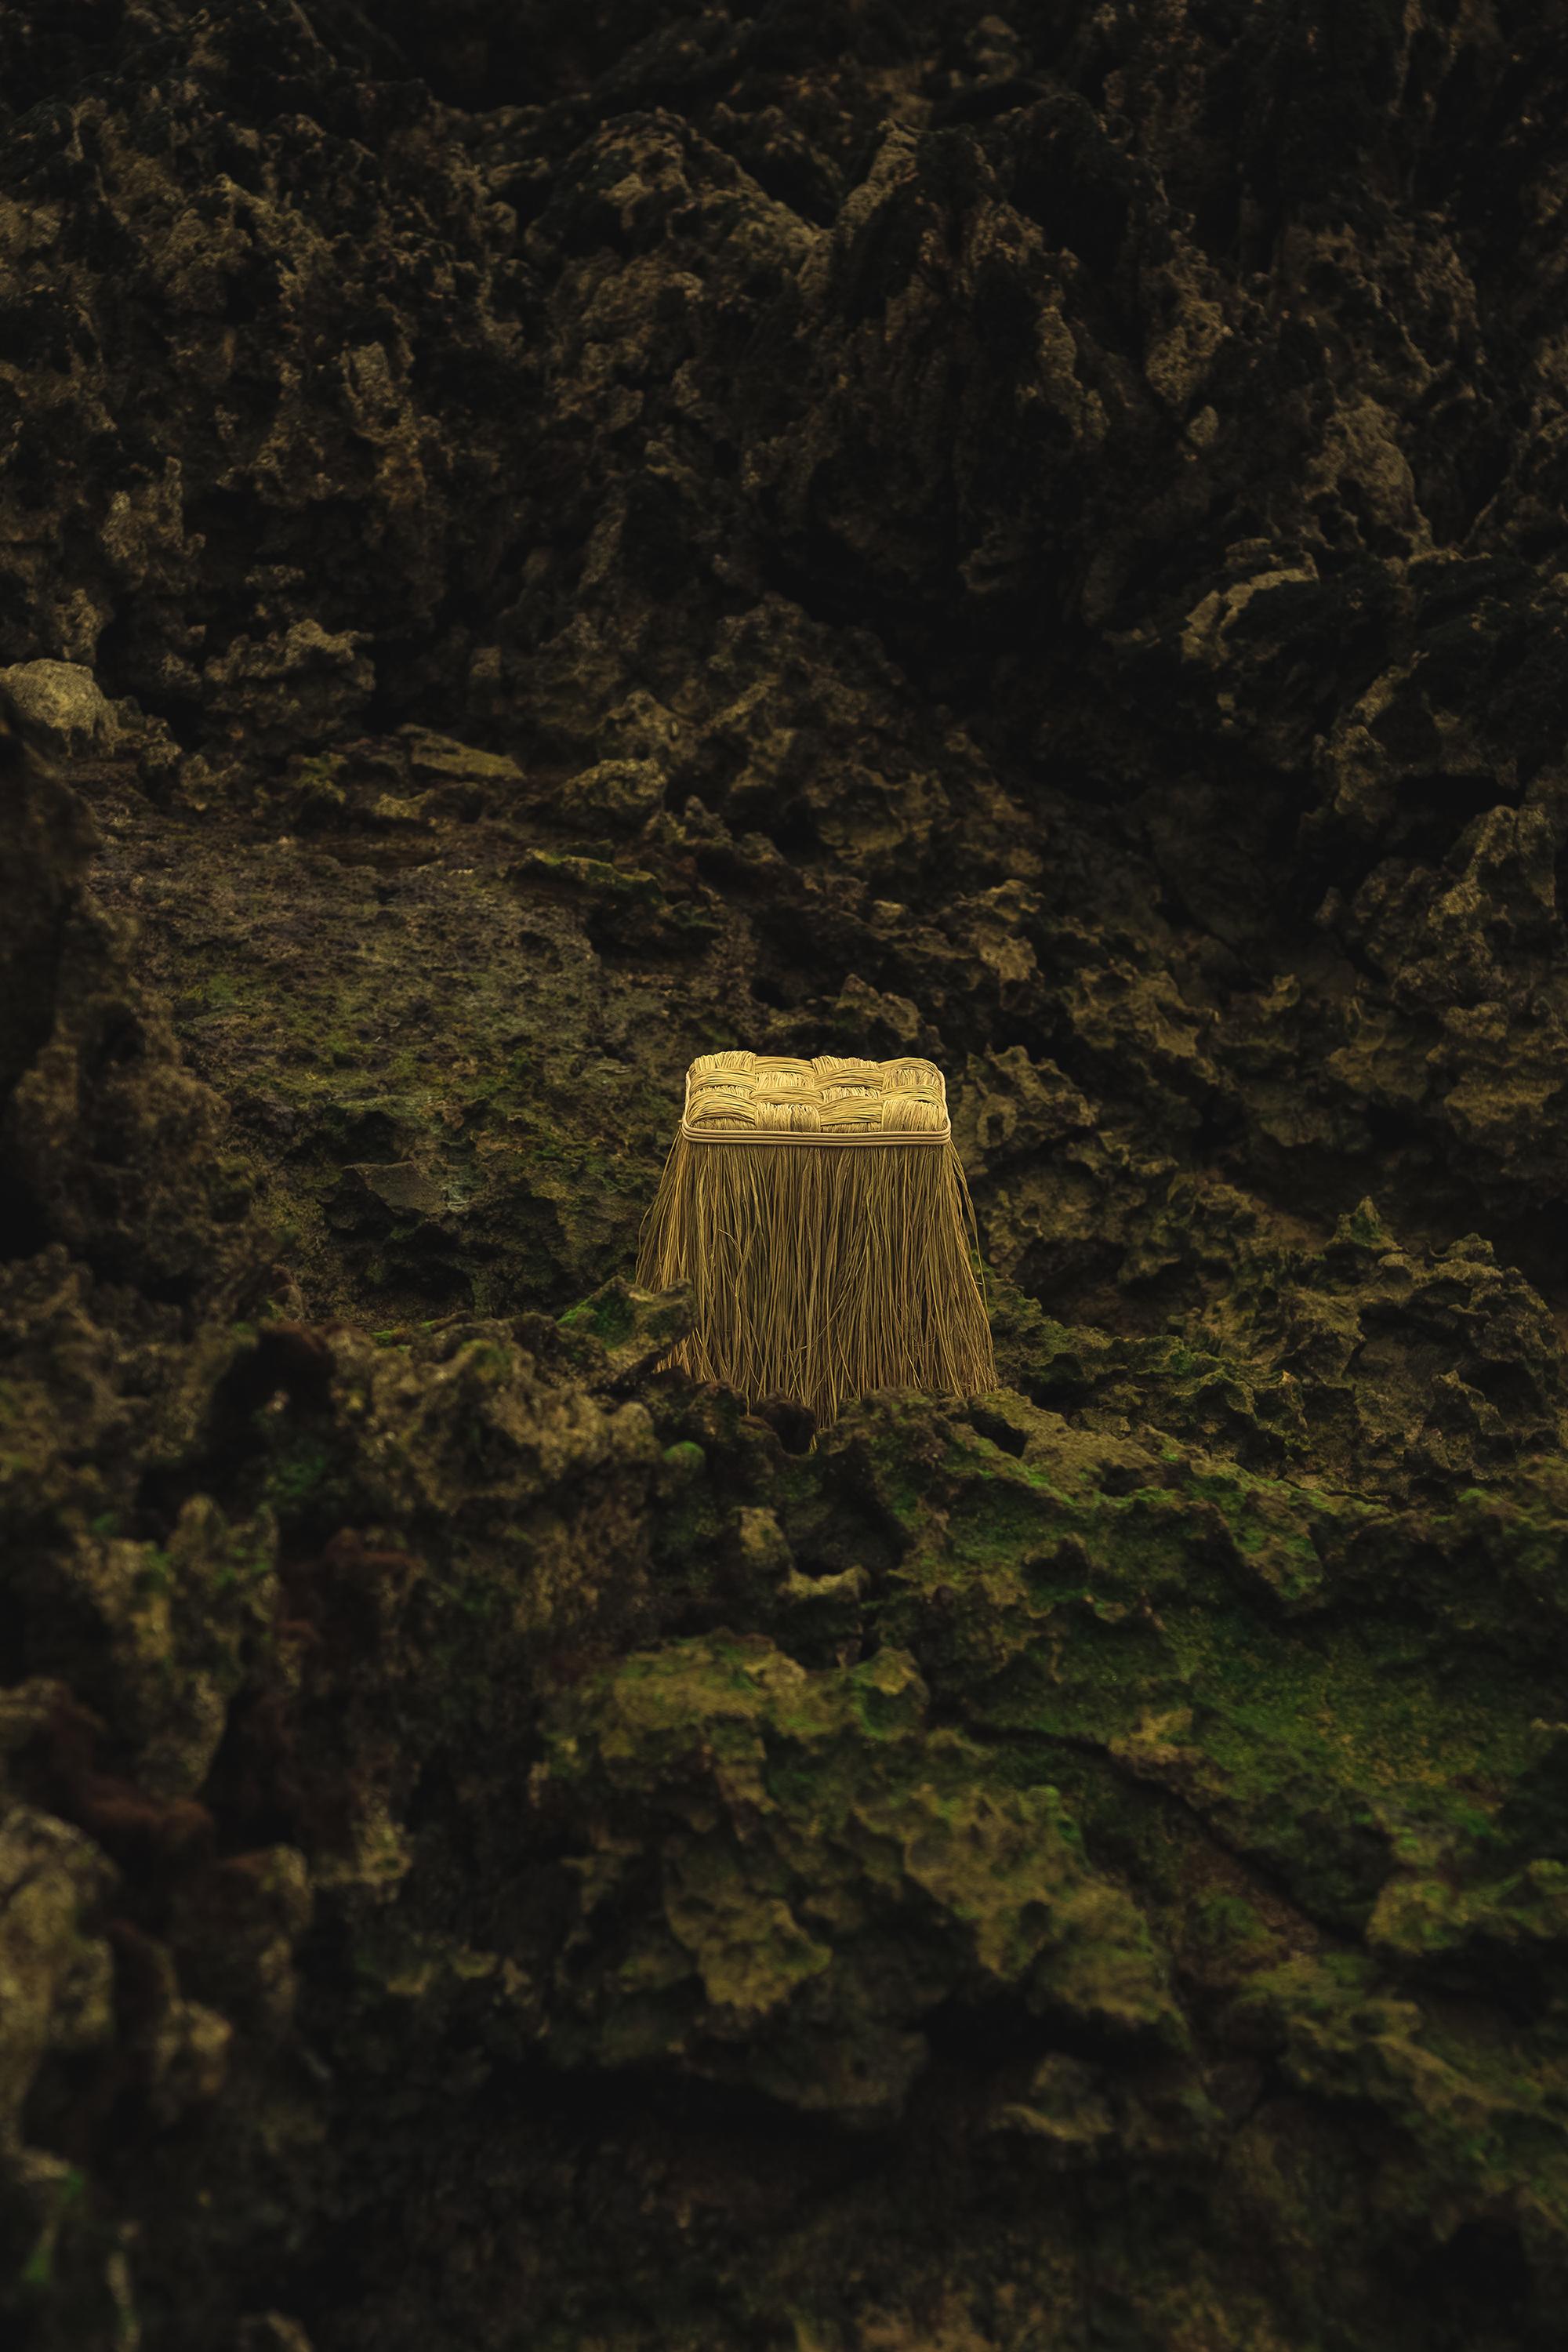 By straddling the boundary between art object and design furniture, the fringes of this stool recall the groves of tall grass from which “esparto” is collected—that natural and resilient fibre used by weavers to make espadrilles and baskets.